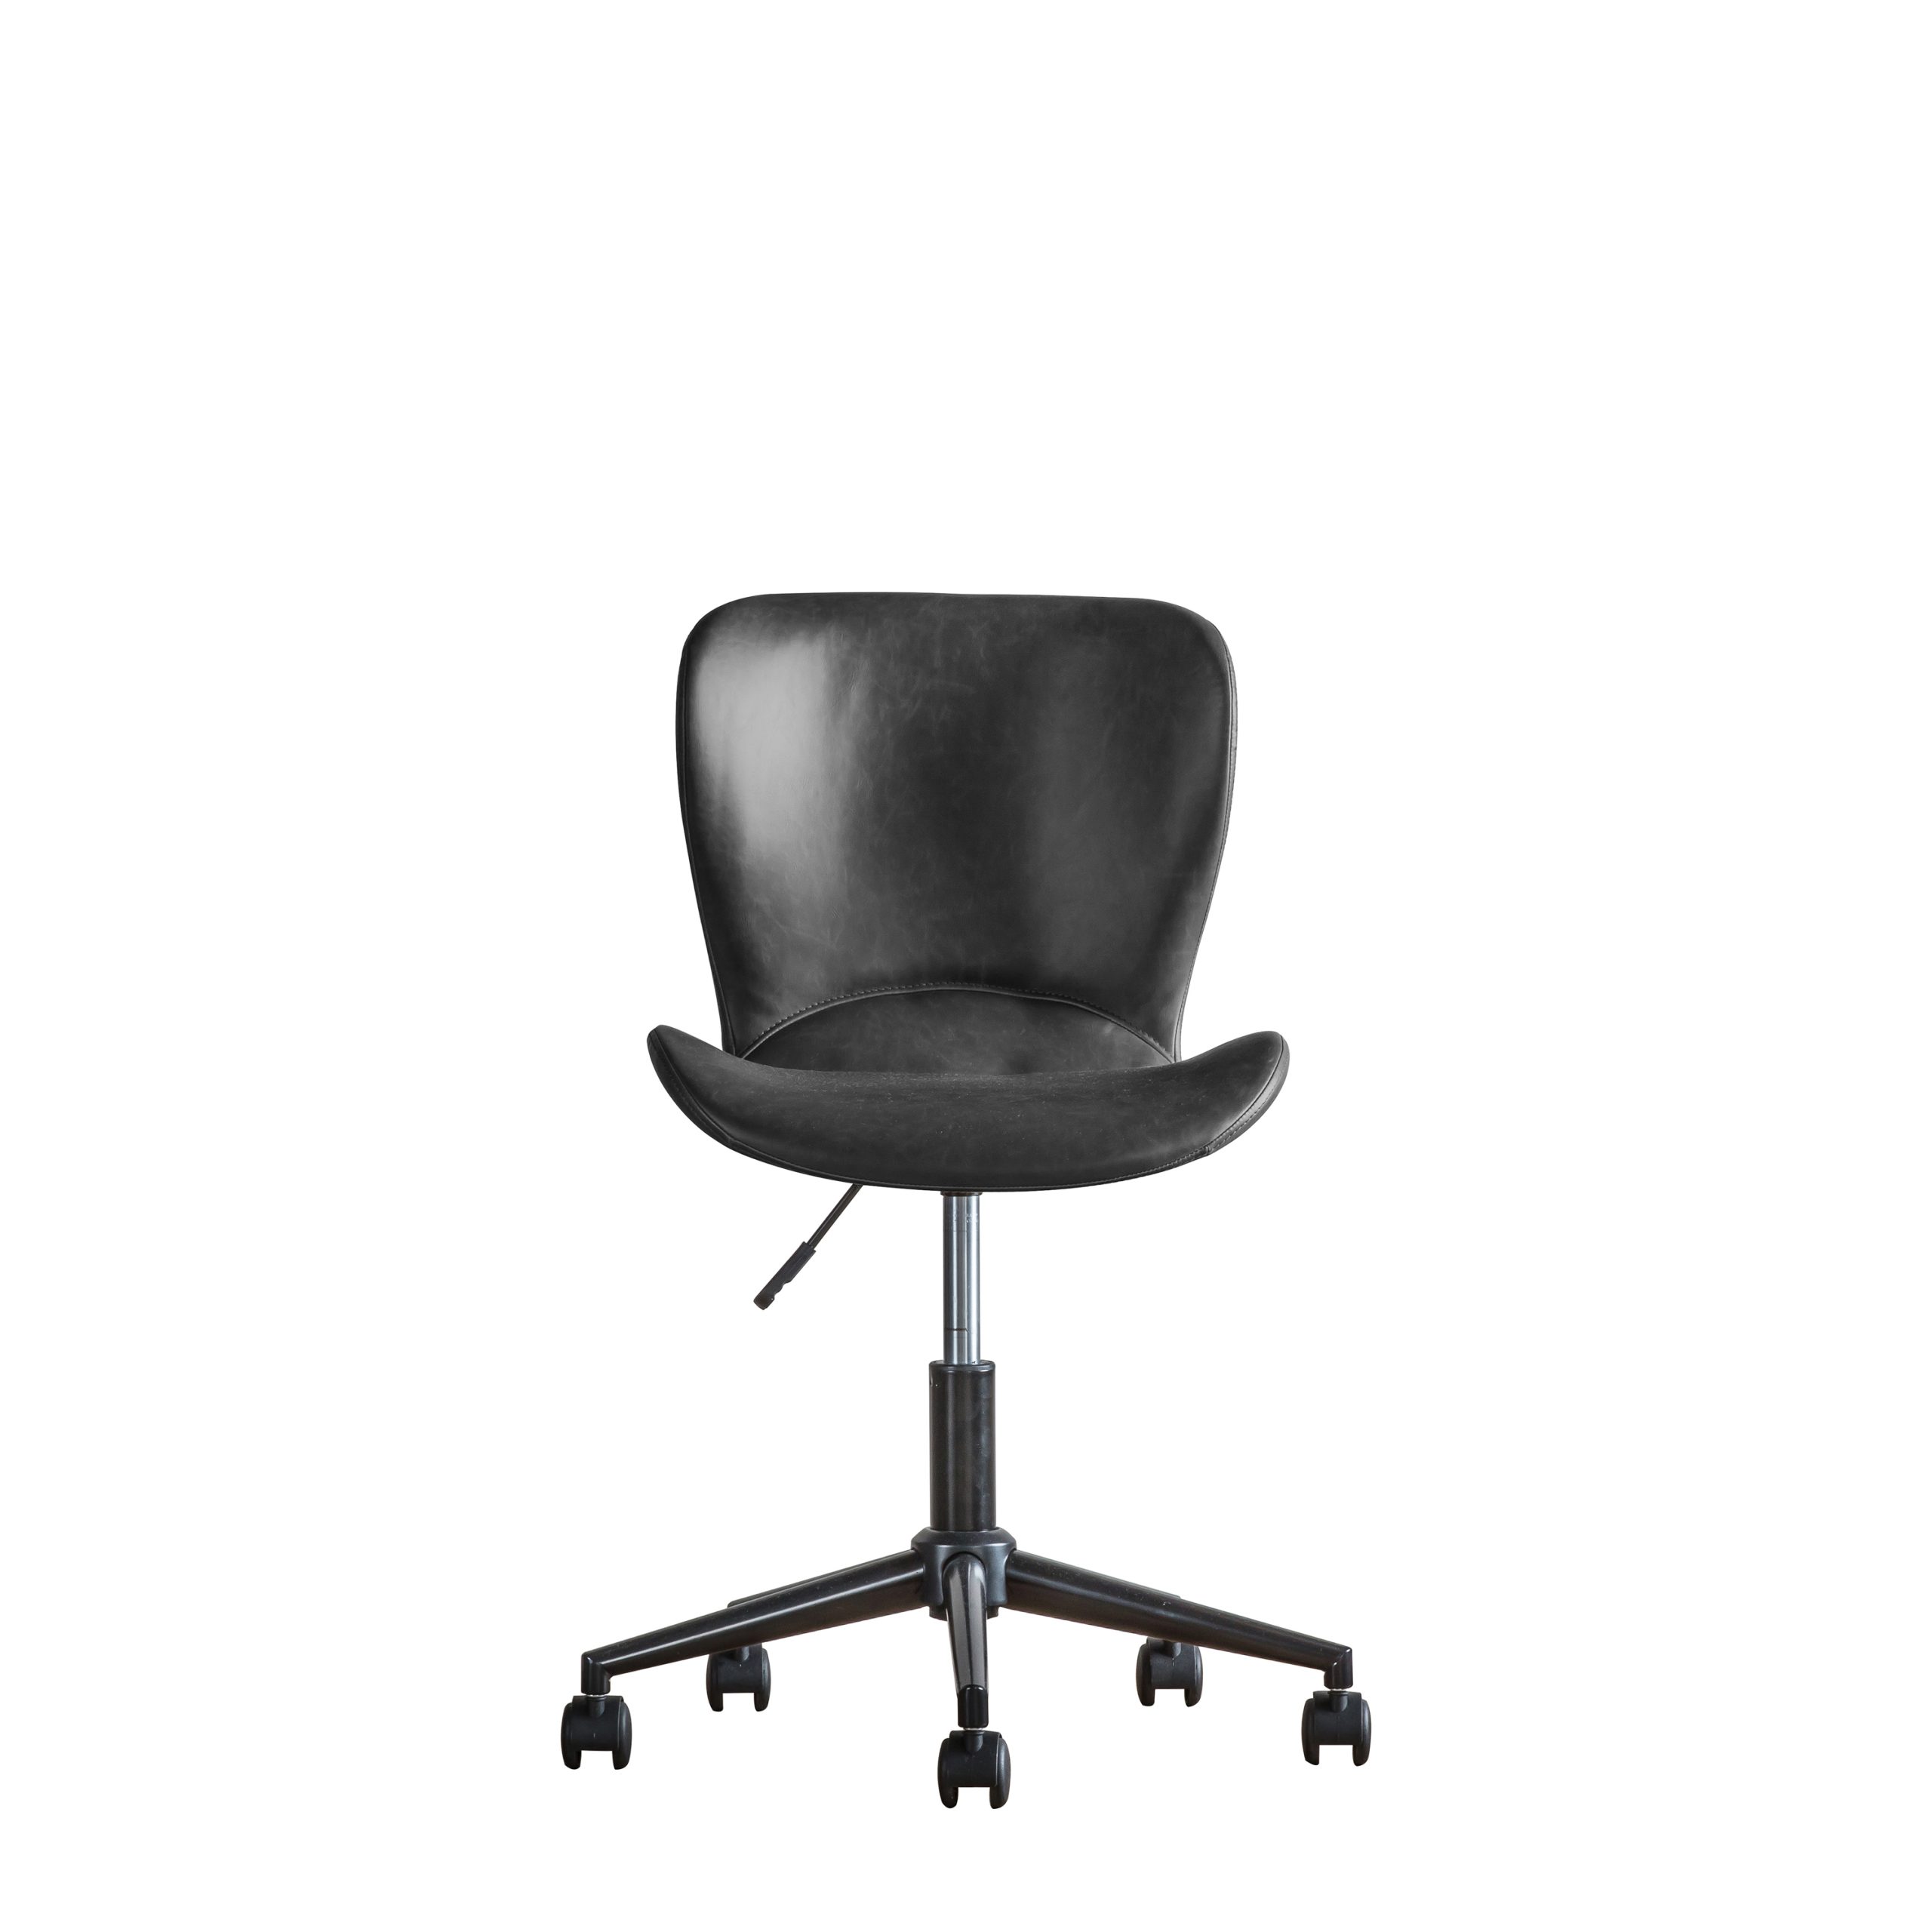 Gallery Direct Mendel Swivel Chair Charcoal